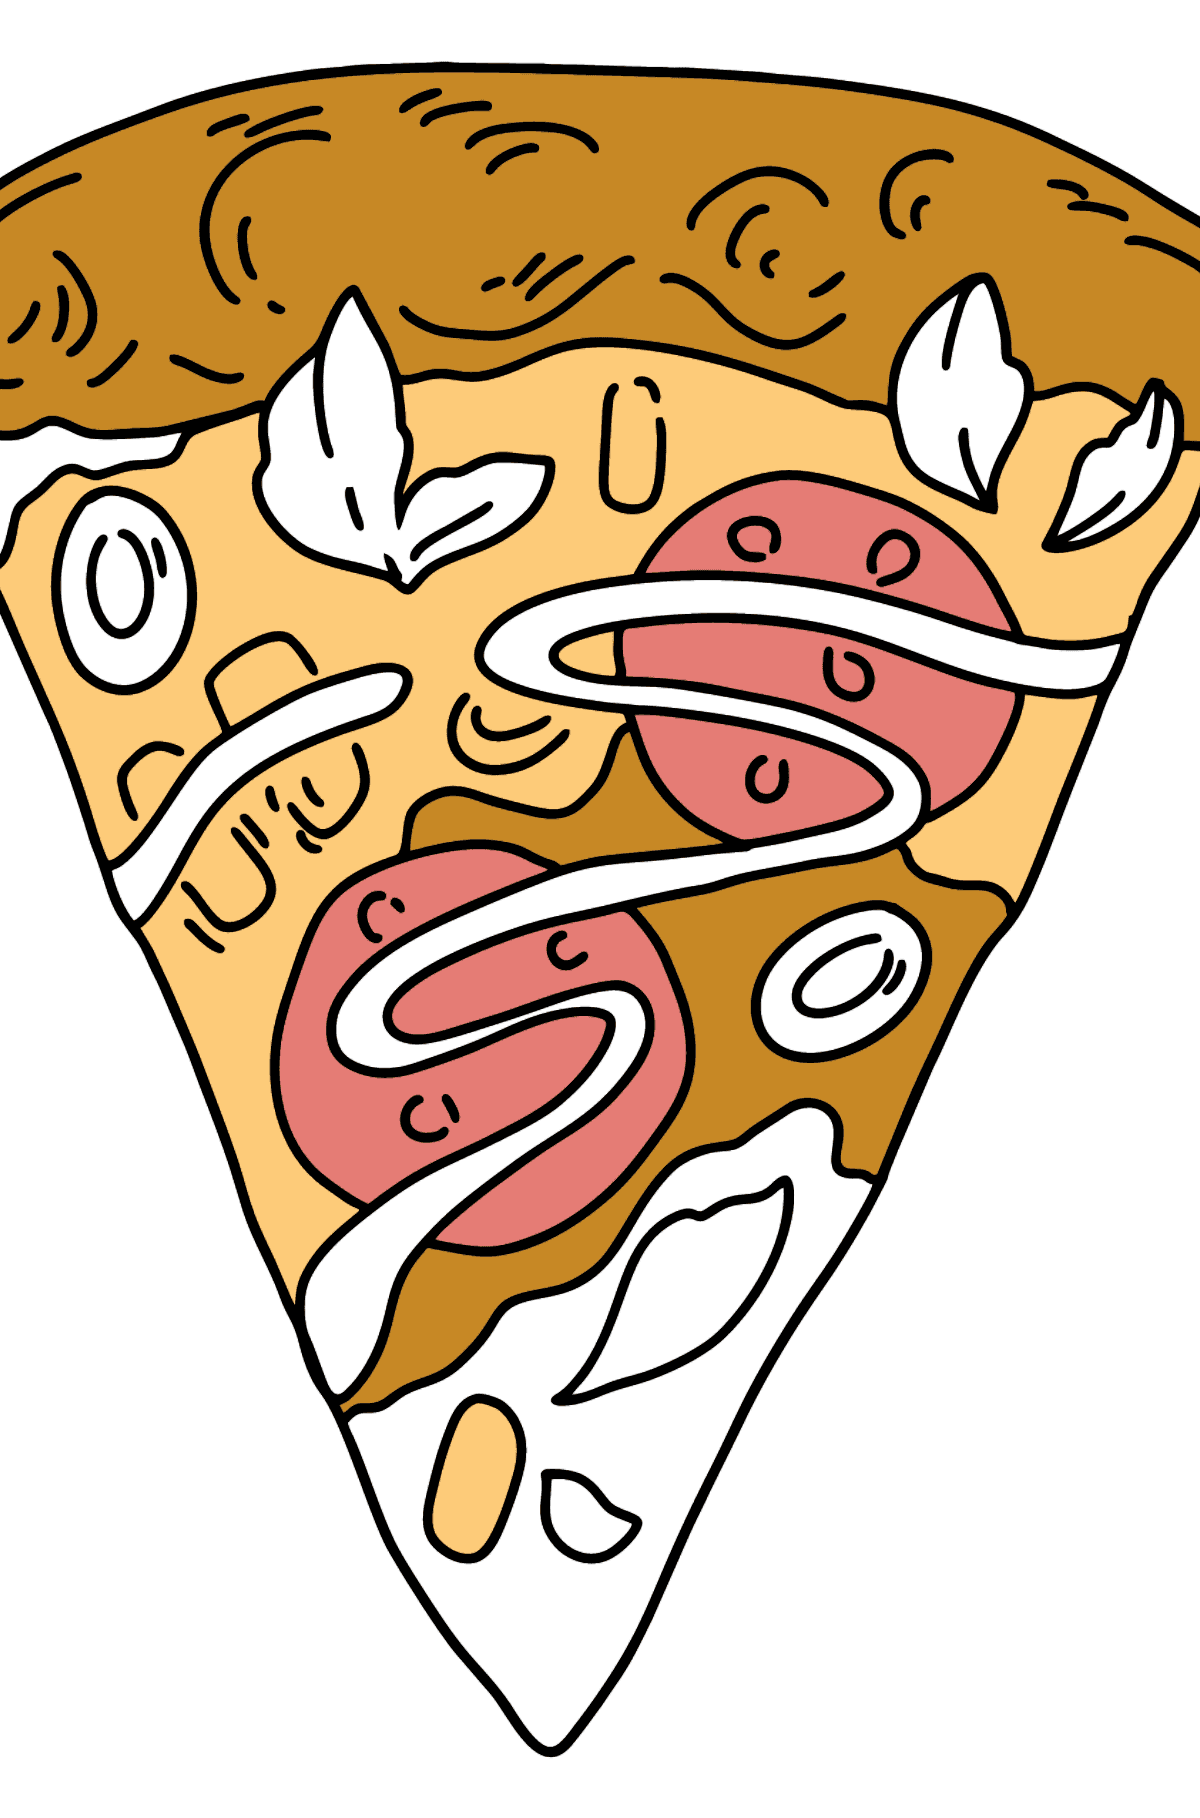 Salami Pizza coloring page - Coloring Pages for Kids